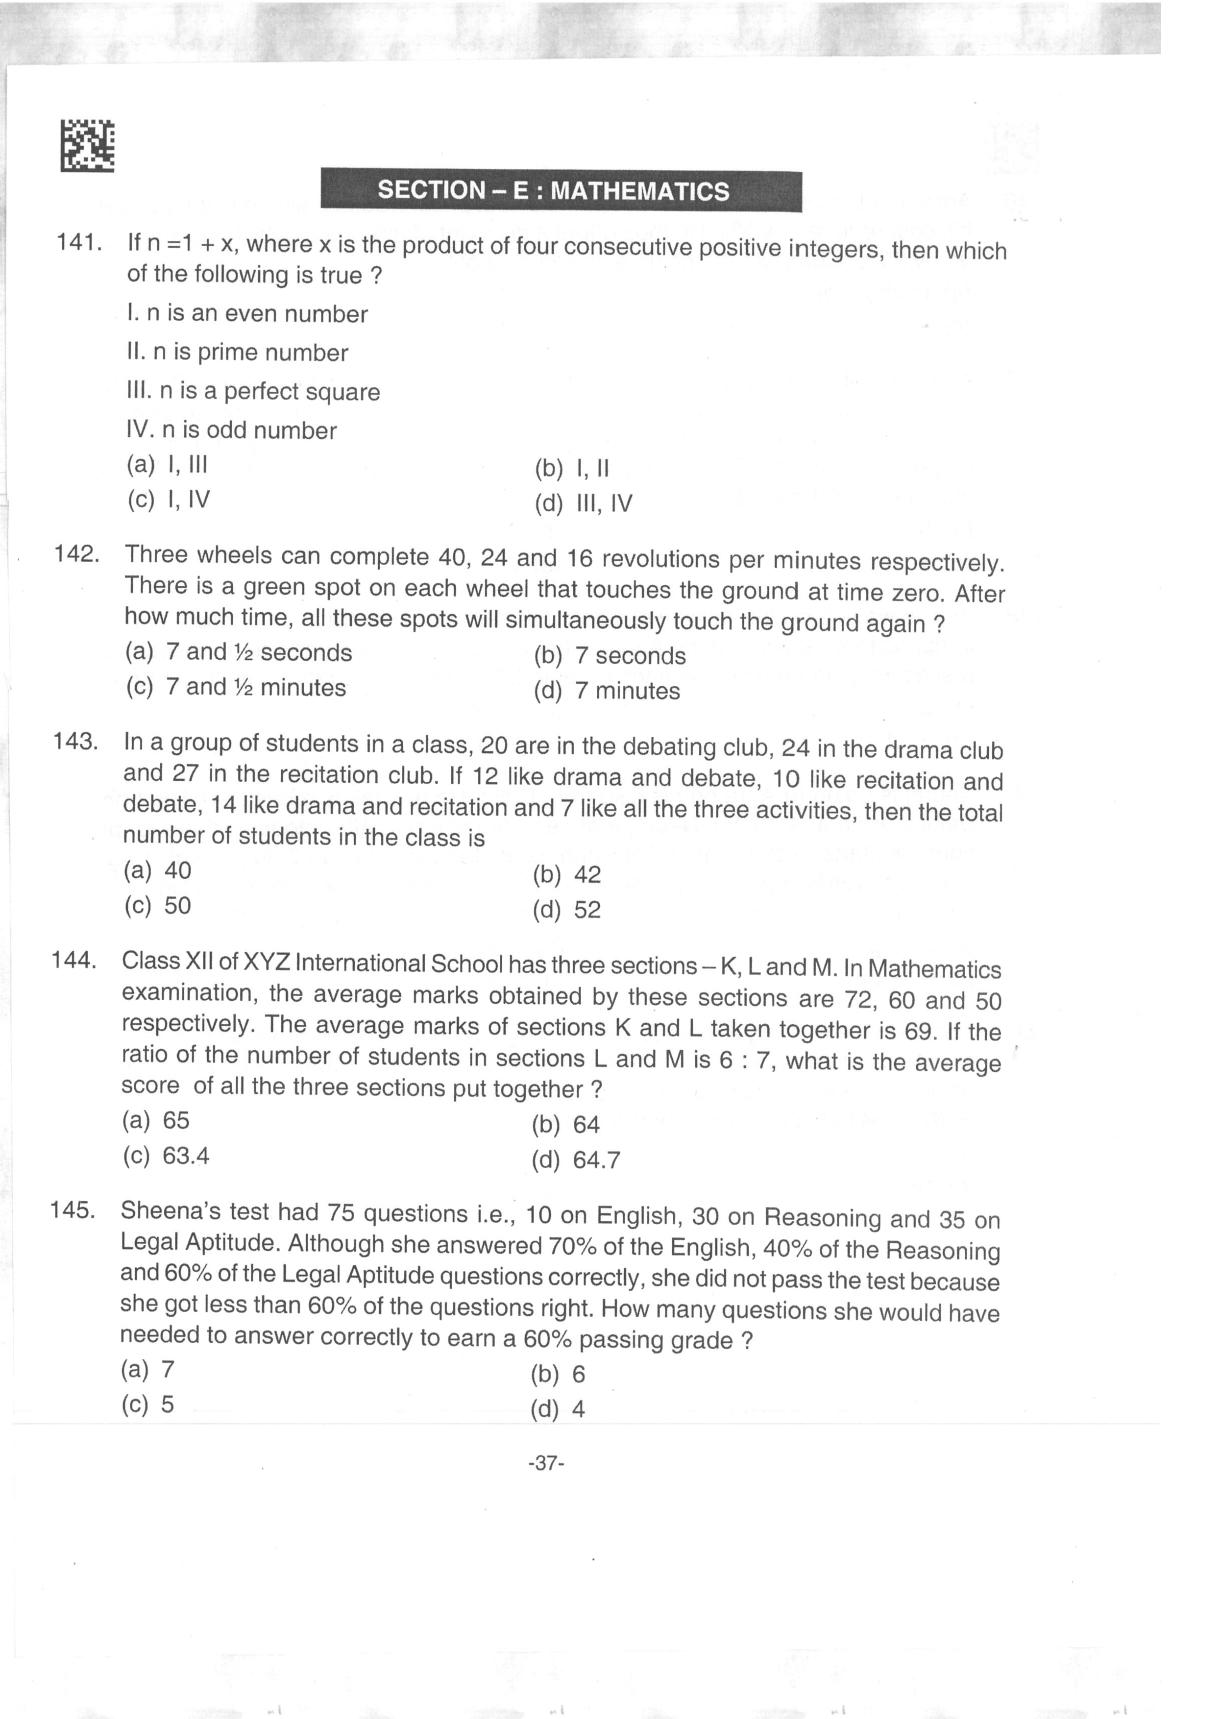 AILET 2019 Question Paper for BA LLB - Page 37